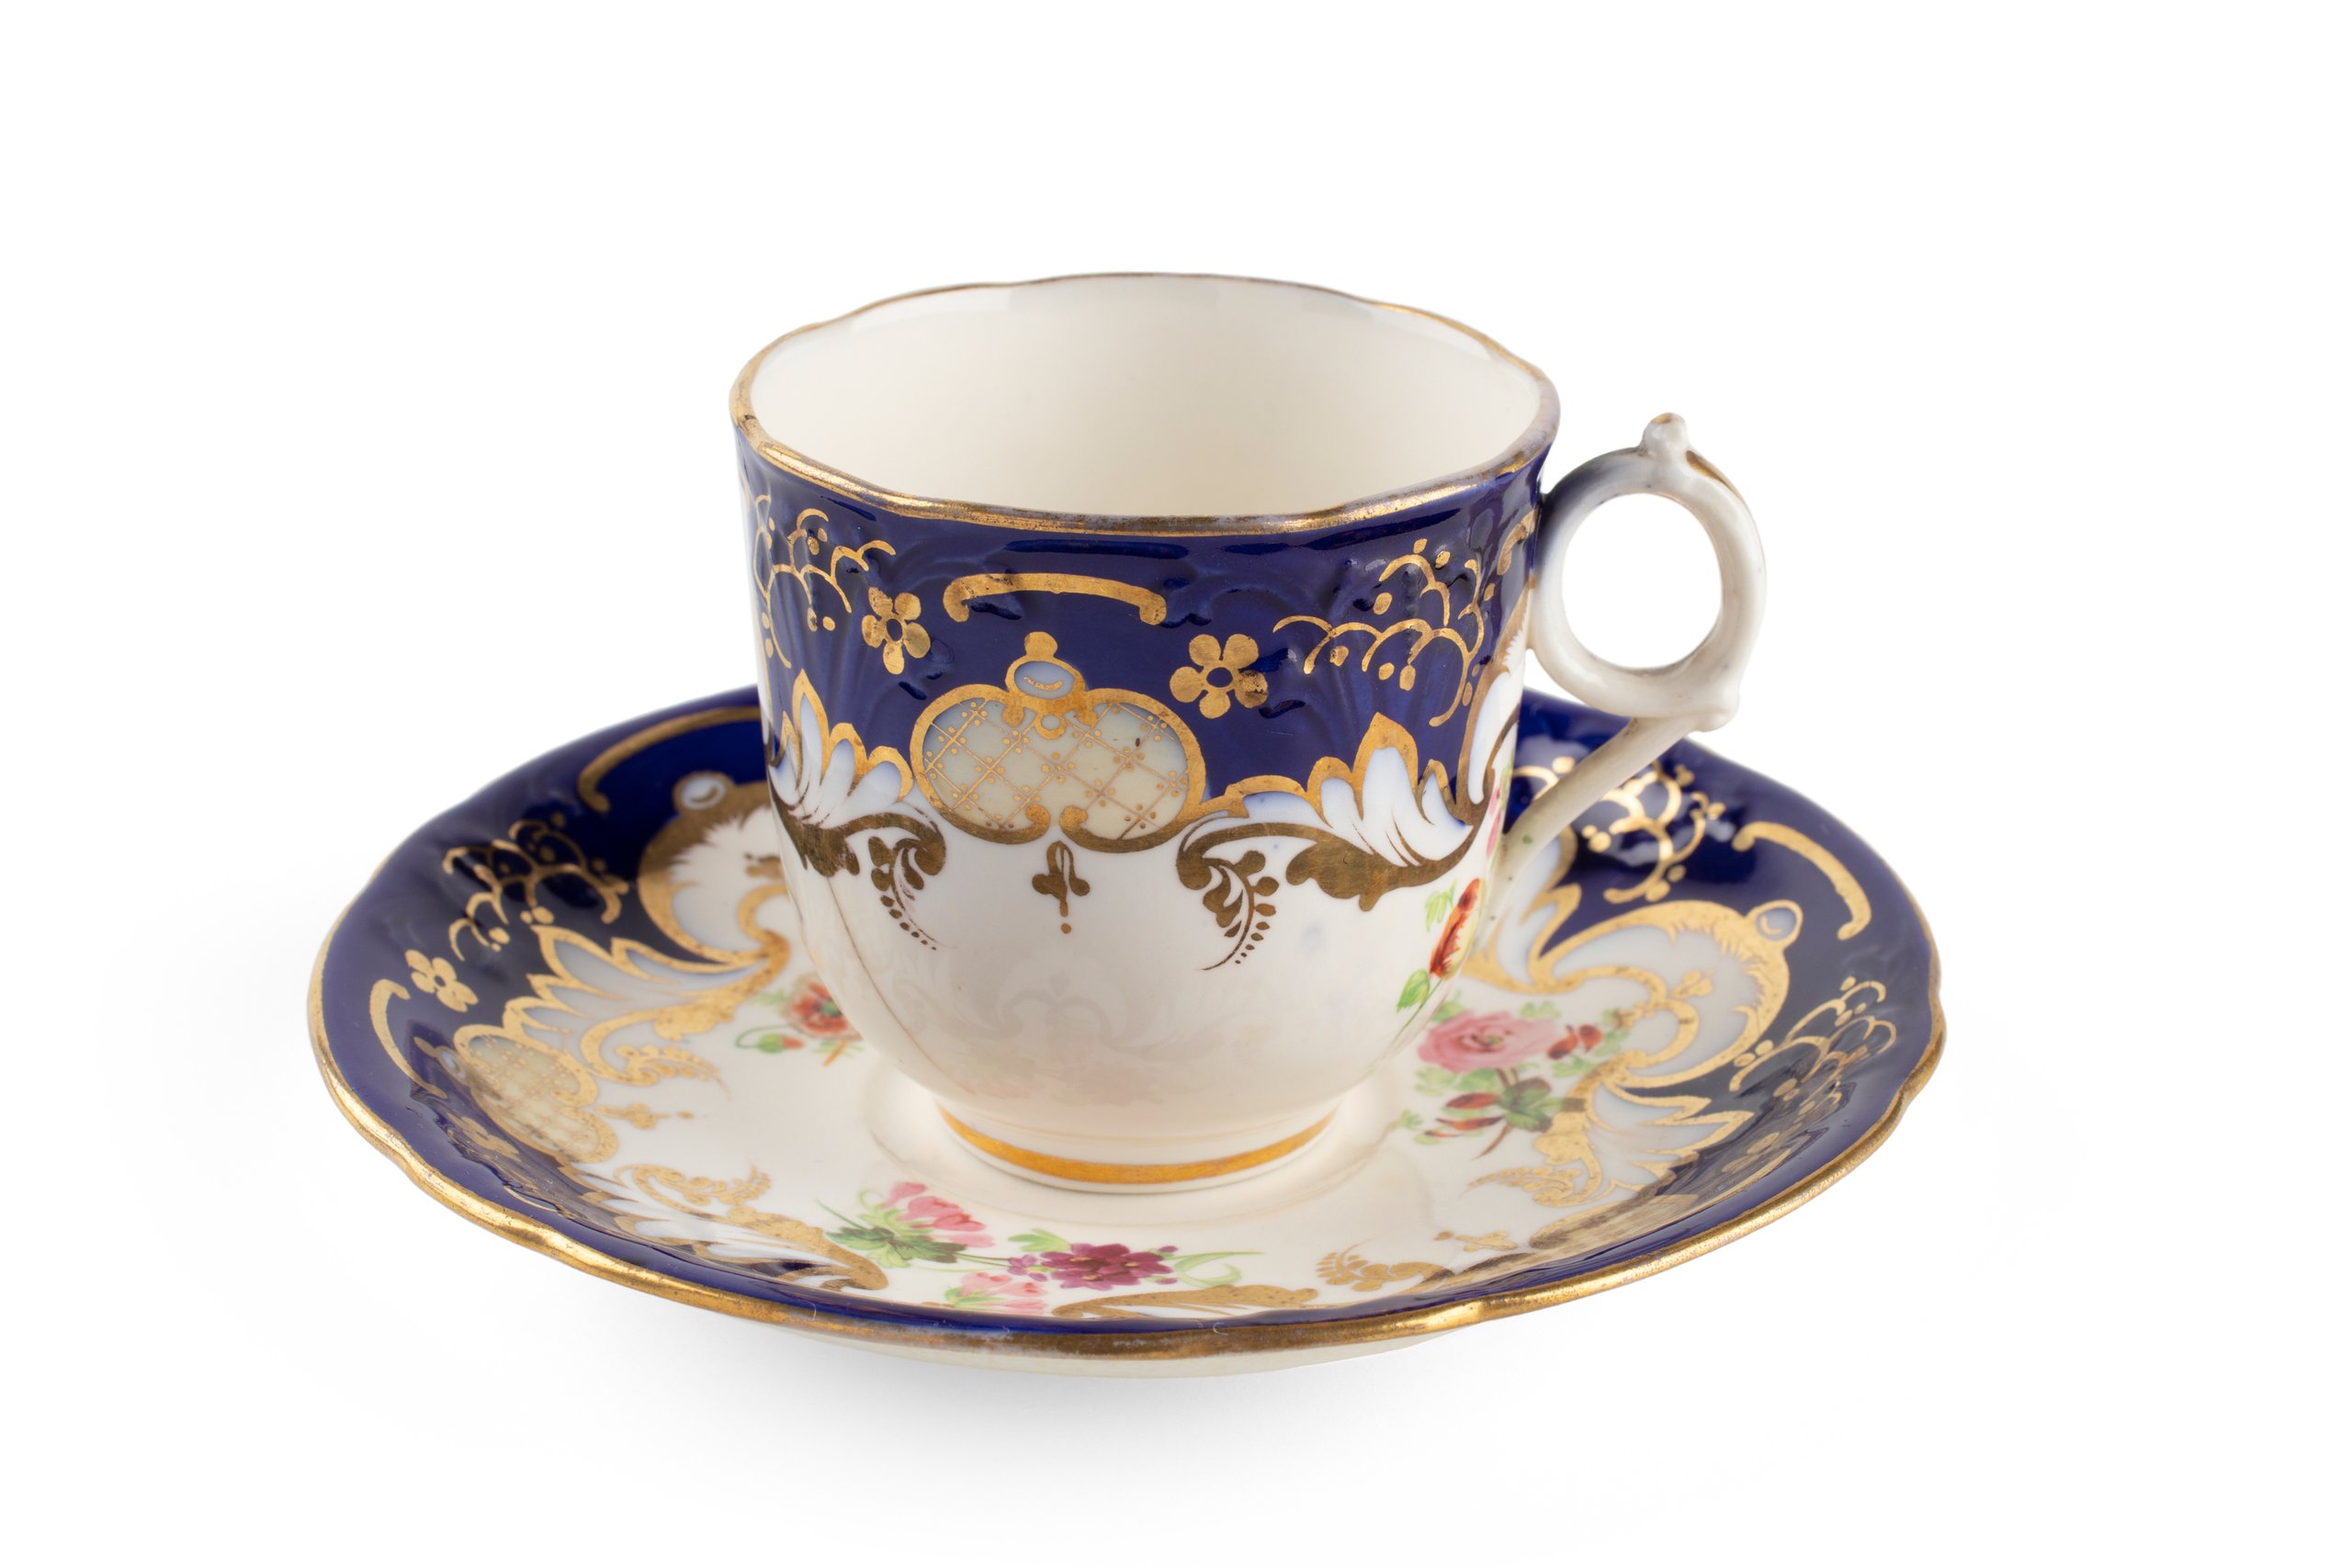 Chelsea bone china teacup and saucer